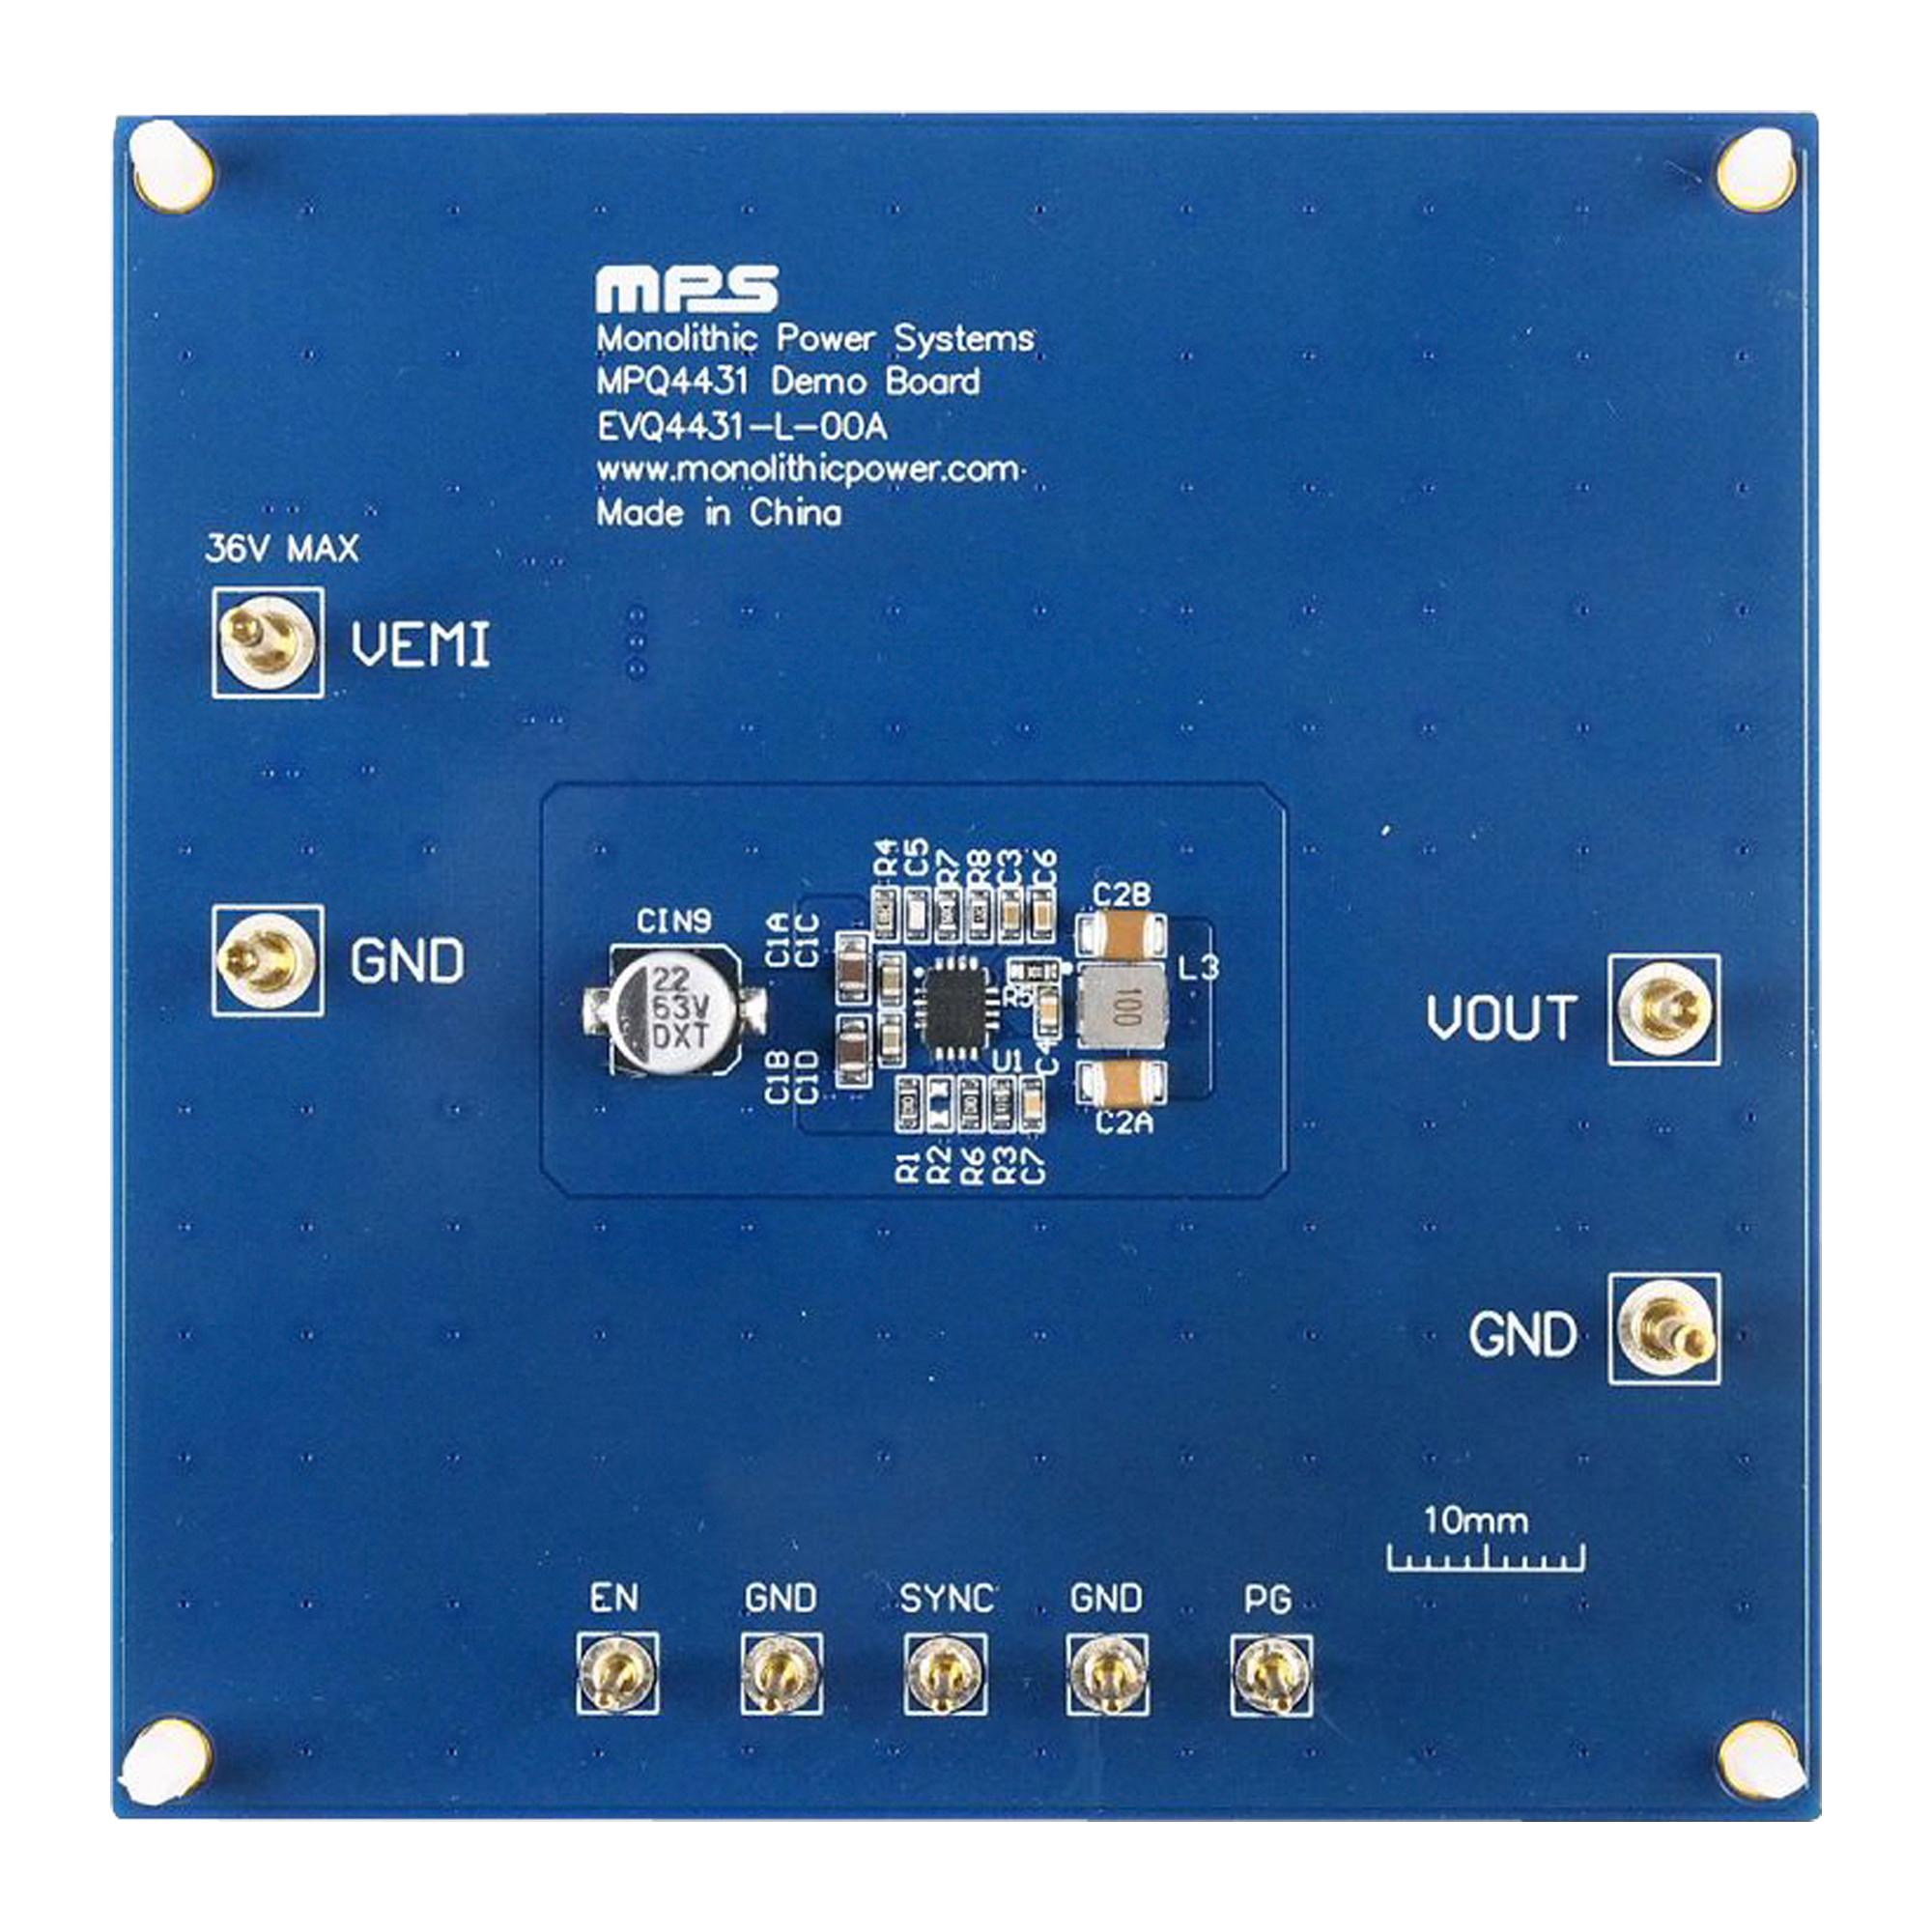 EVQ4431-L-00A EVAL BOARD, SYNCHRONOUS STEP DOWN CONV MONOLITHIC POWER SYSTEMS (MPS)